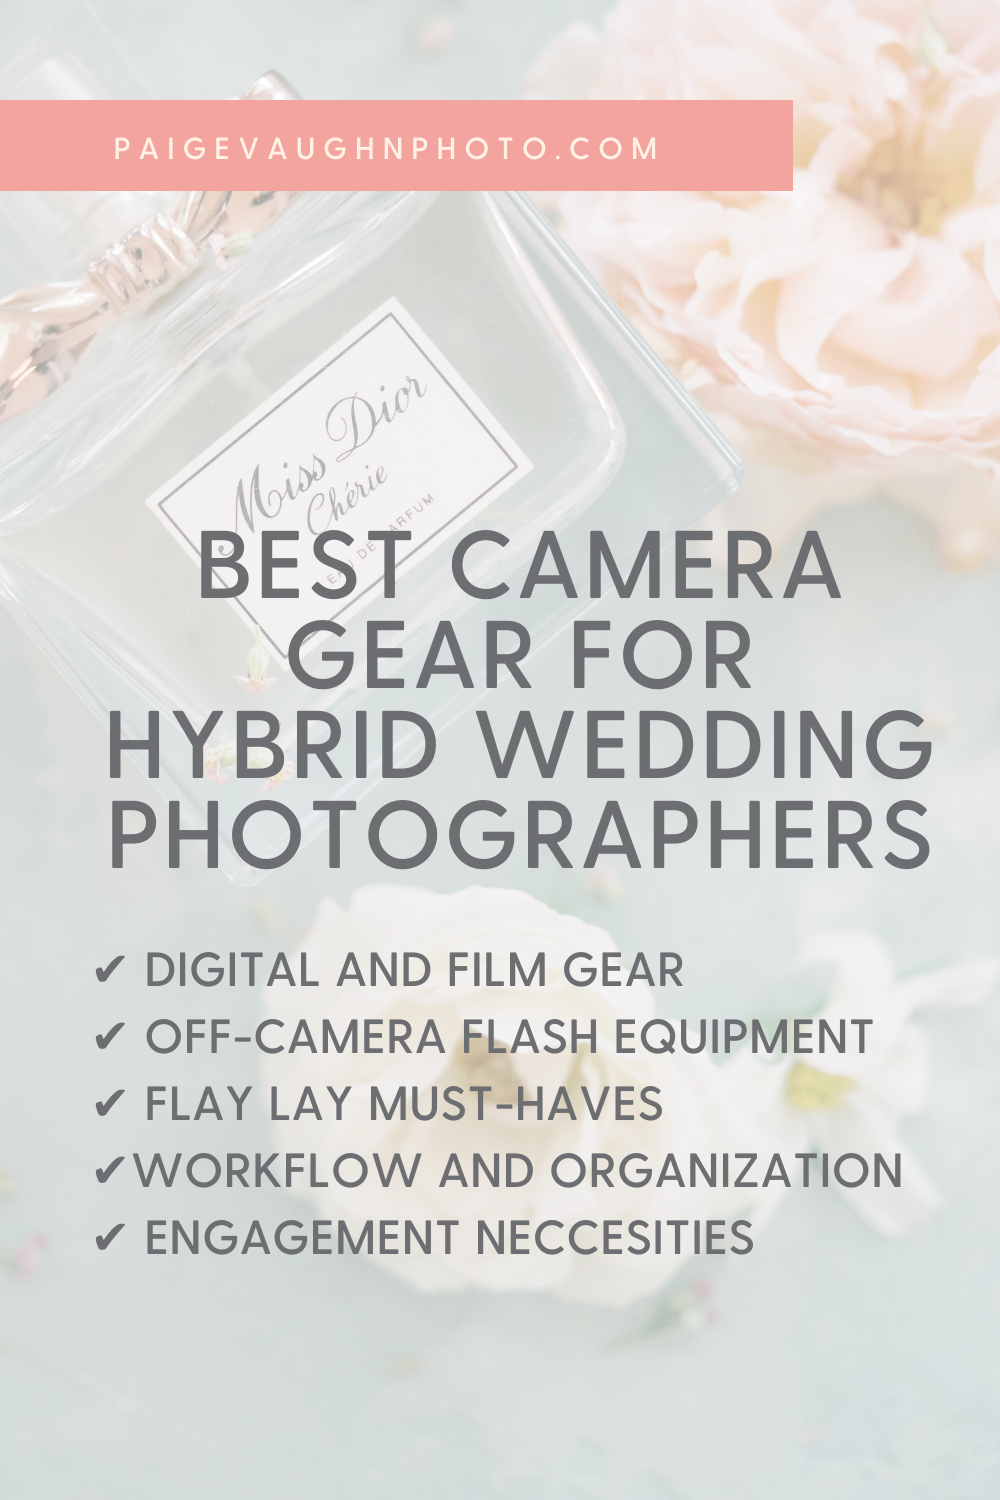 best wedding photography gear, best gear for hybrid wedding photographers, flat lay styling kit, wedding details photos, wedding photographer workflow, best camera suitcase carry-on, wedding, photography kit, best wedding photography gear 2021, Sony wedding photographer, Hybrid wedding photographer 